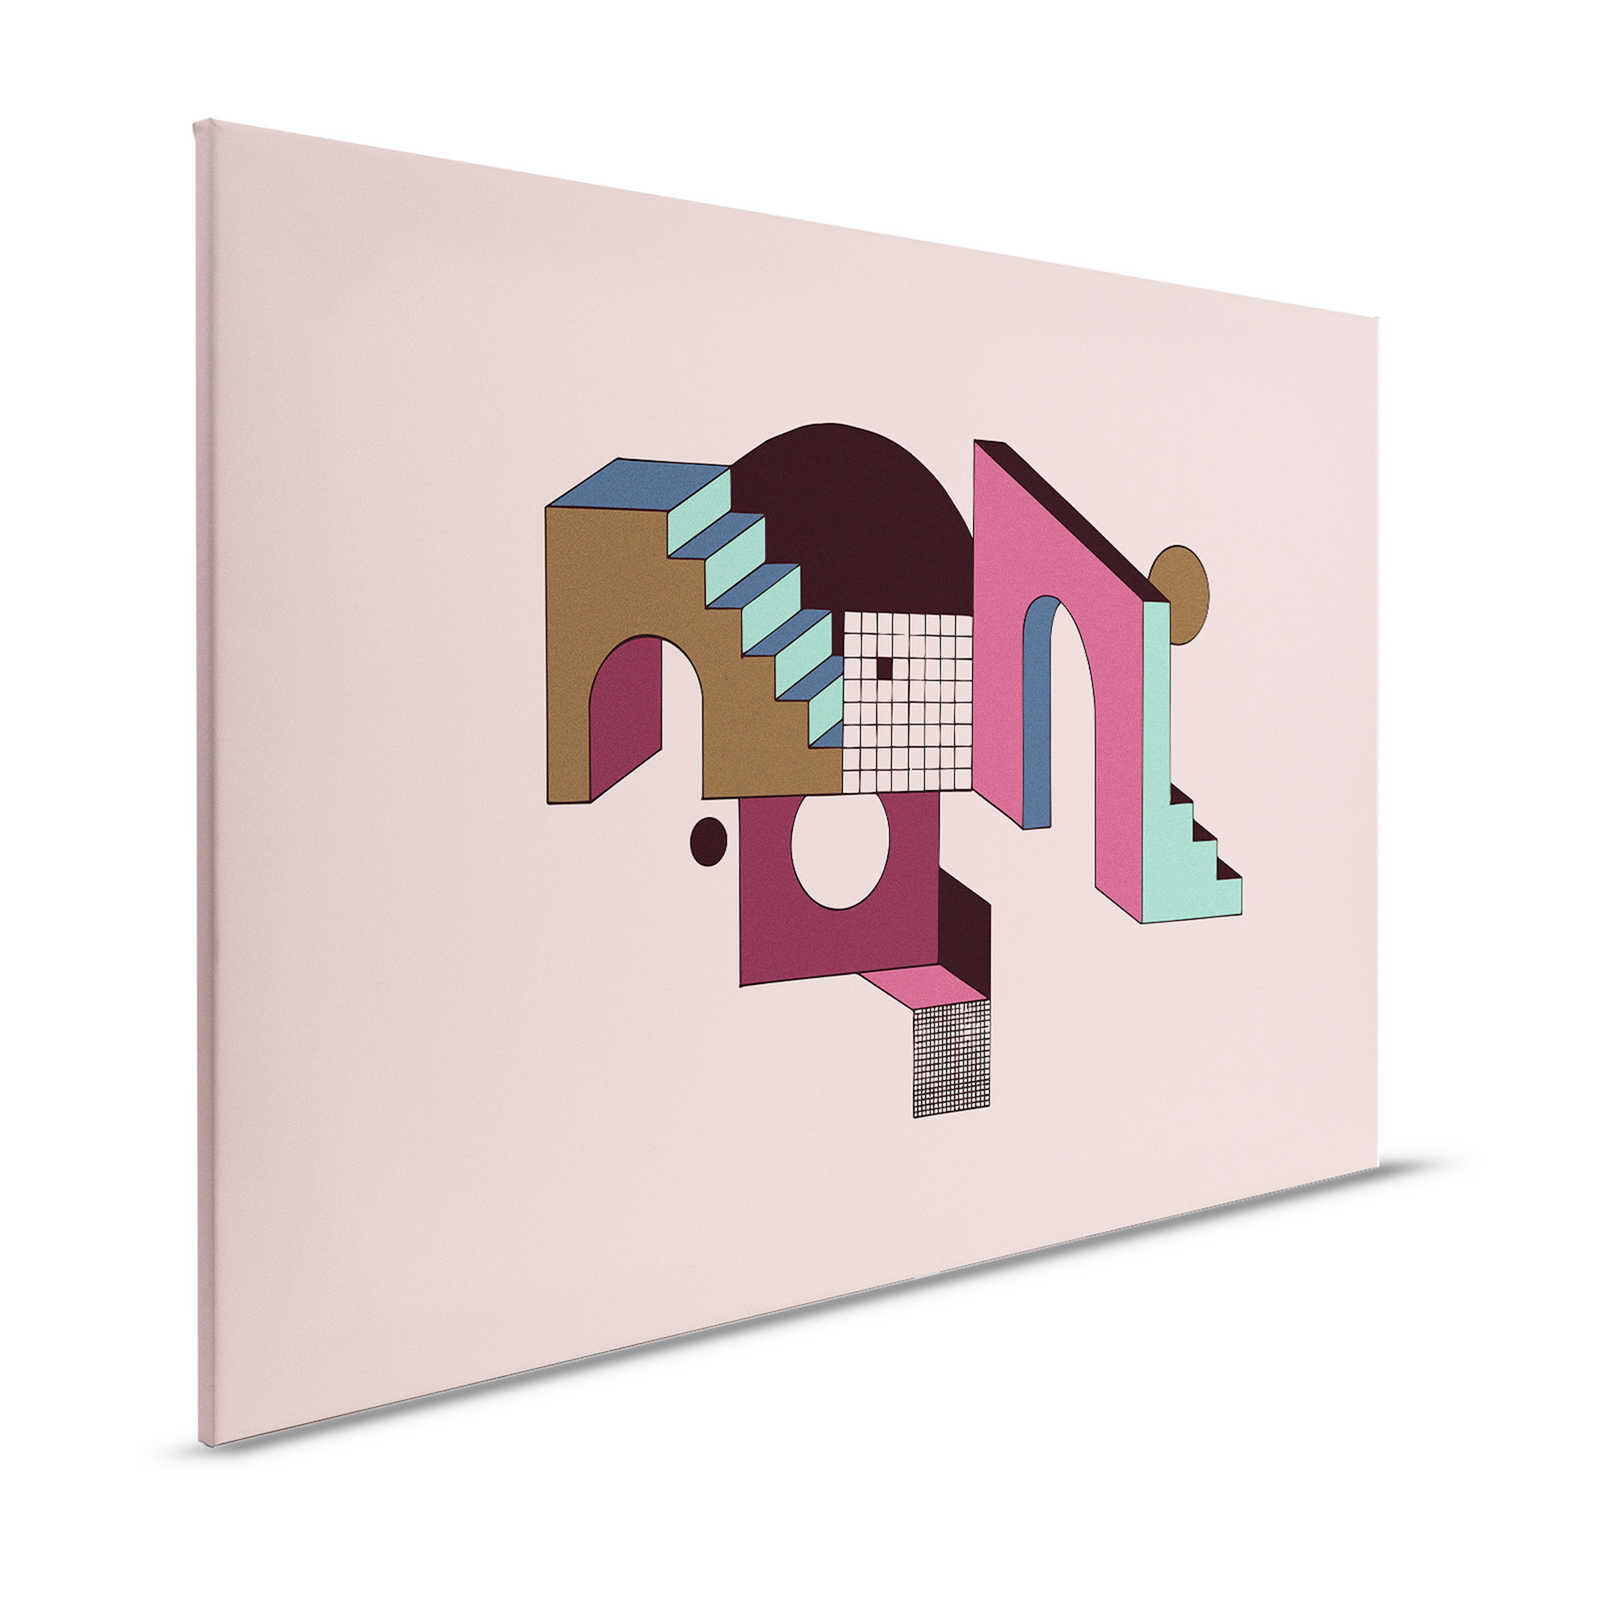 Freetown 2 - Pink Canvas painting abstract stairs architecture - 1.20 m x 0.80 m
